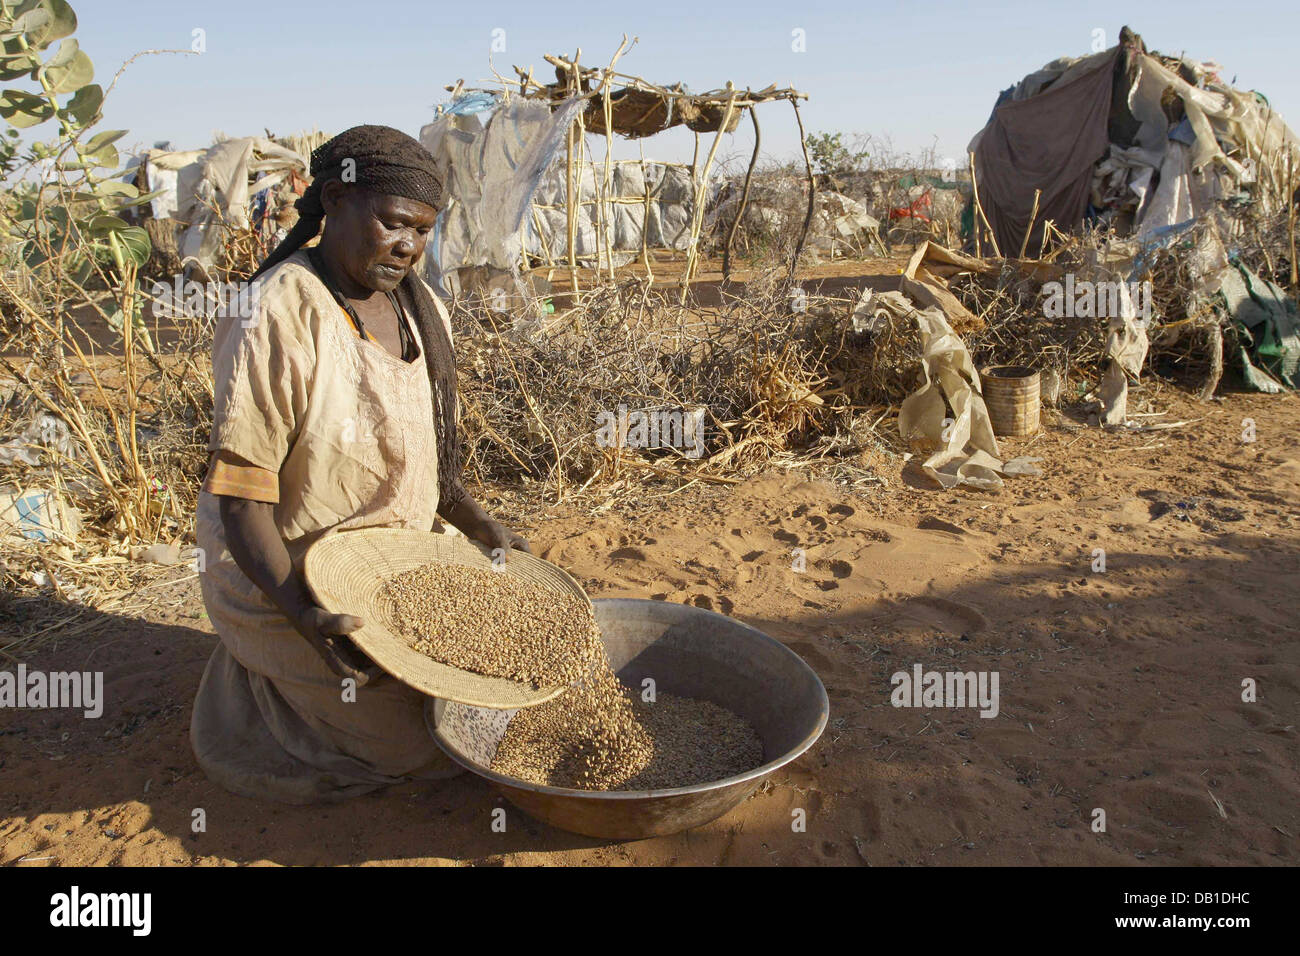 A refugees prepares crop in a refugee camp in Nyala in the Darfur region, Sudan, 12 December 2007. 35.000 refugees live in the camp. Photo: PETER STEFFEN Stock Photo